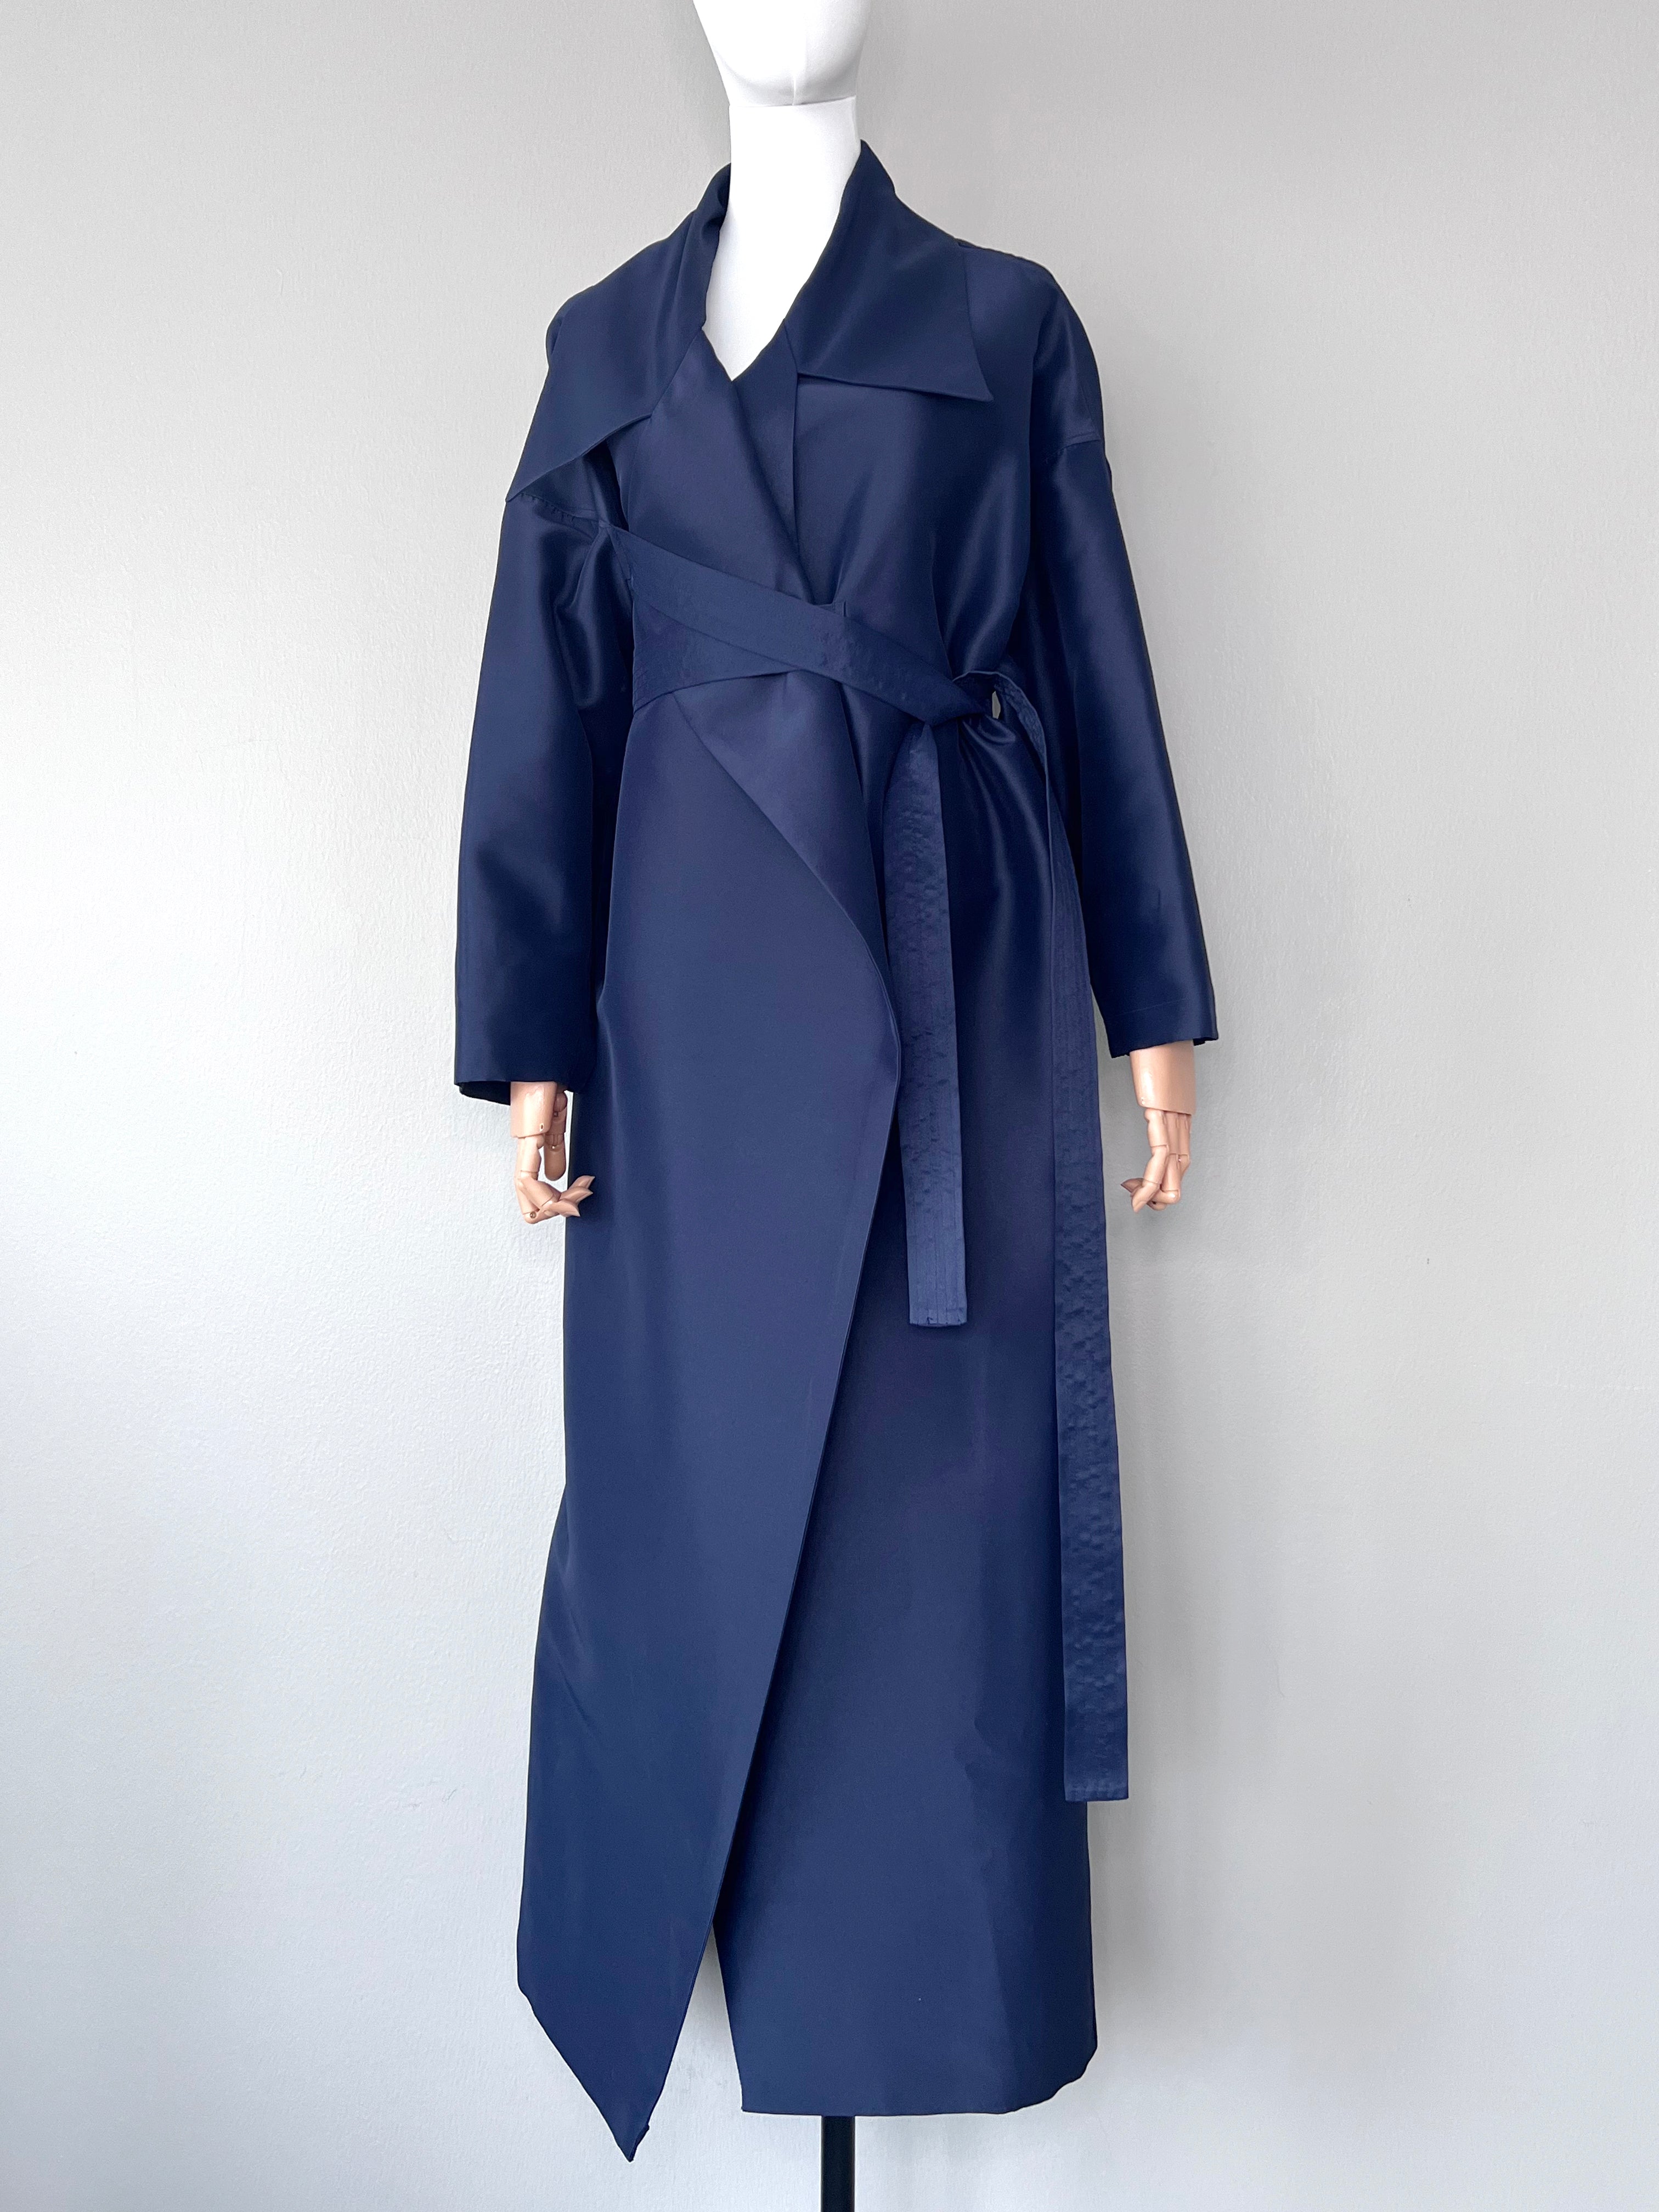 Navy blue solid trench coat with longsleeves and belt - Euphoria